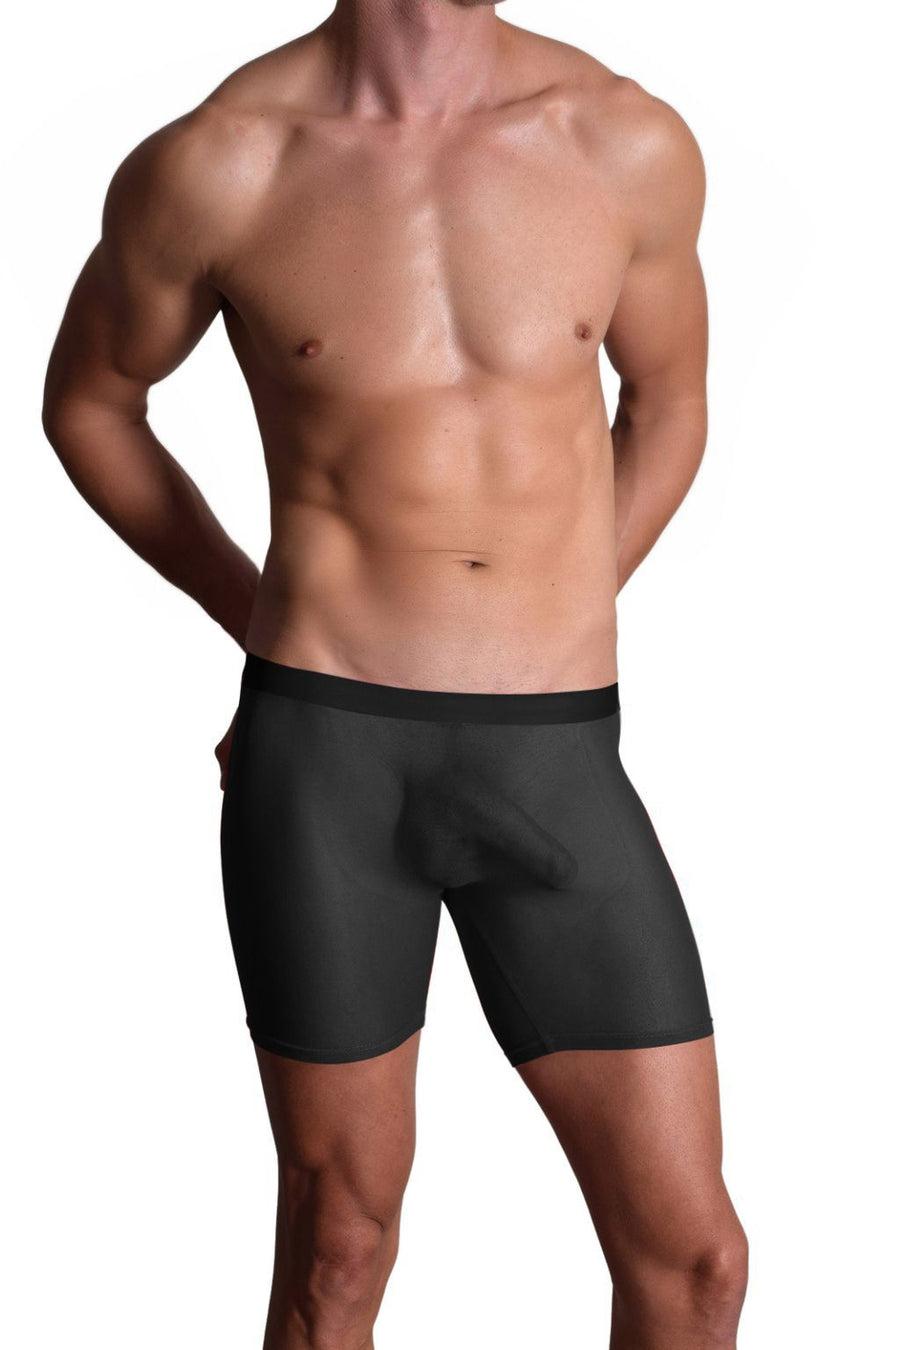 Bodywear for Men Ultra Sheer High Waist Boxer Shorts #BfM-1042 made from a fine poly blend sheer material. Our Sheer Boxer shorts sit high on your waist, 4' long legs, seamless front with a center seamed rear in Black